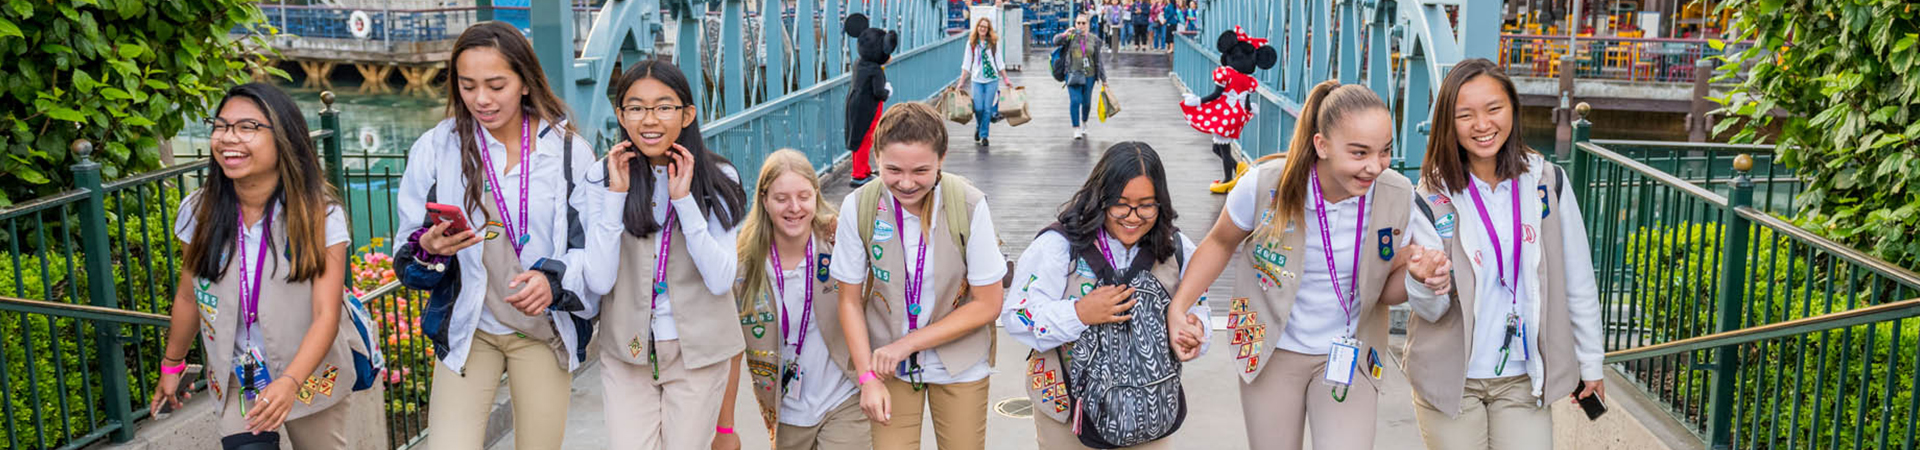  group of cadette girl scouts crossing a bridge with Mickey Mouse and Minnie Mouse in the background 